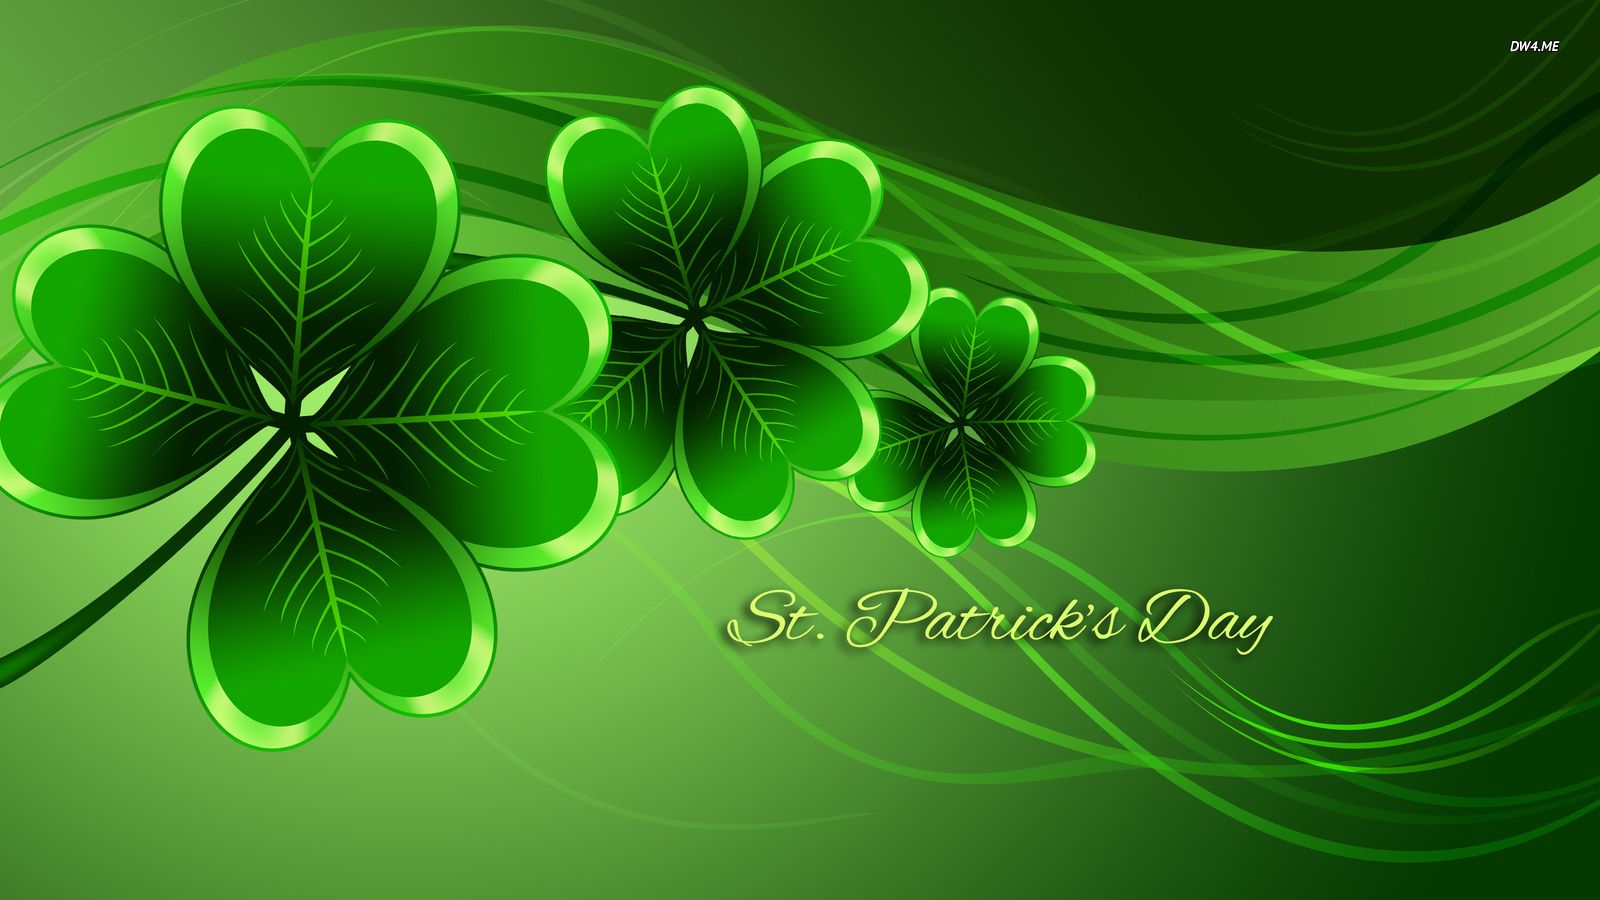 Saint Patrick's Day Cute Wallpapers - Wallpaper Cave